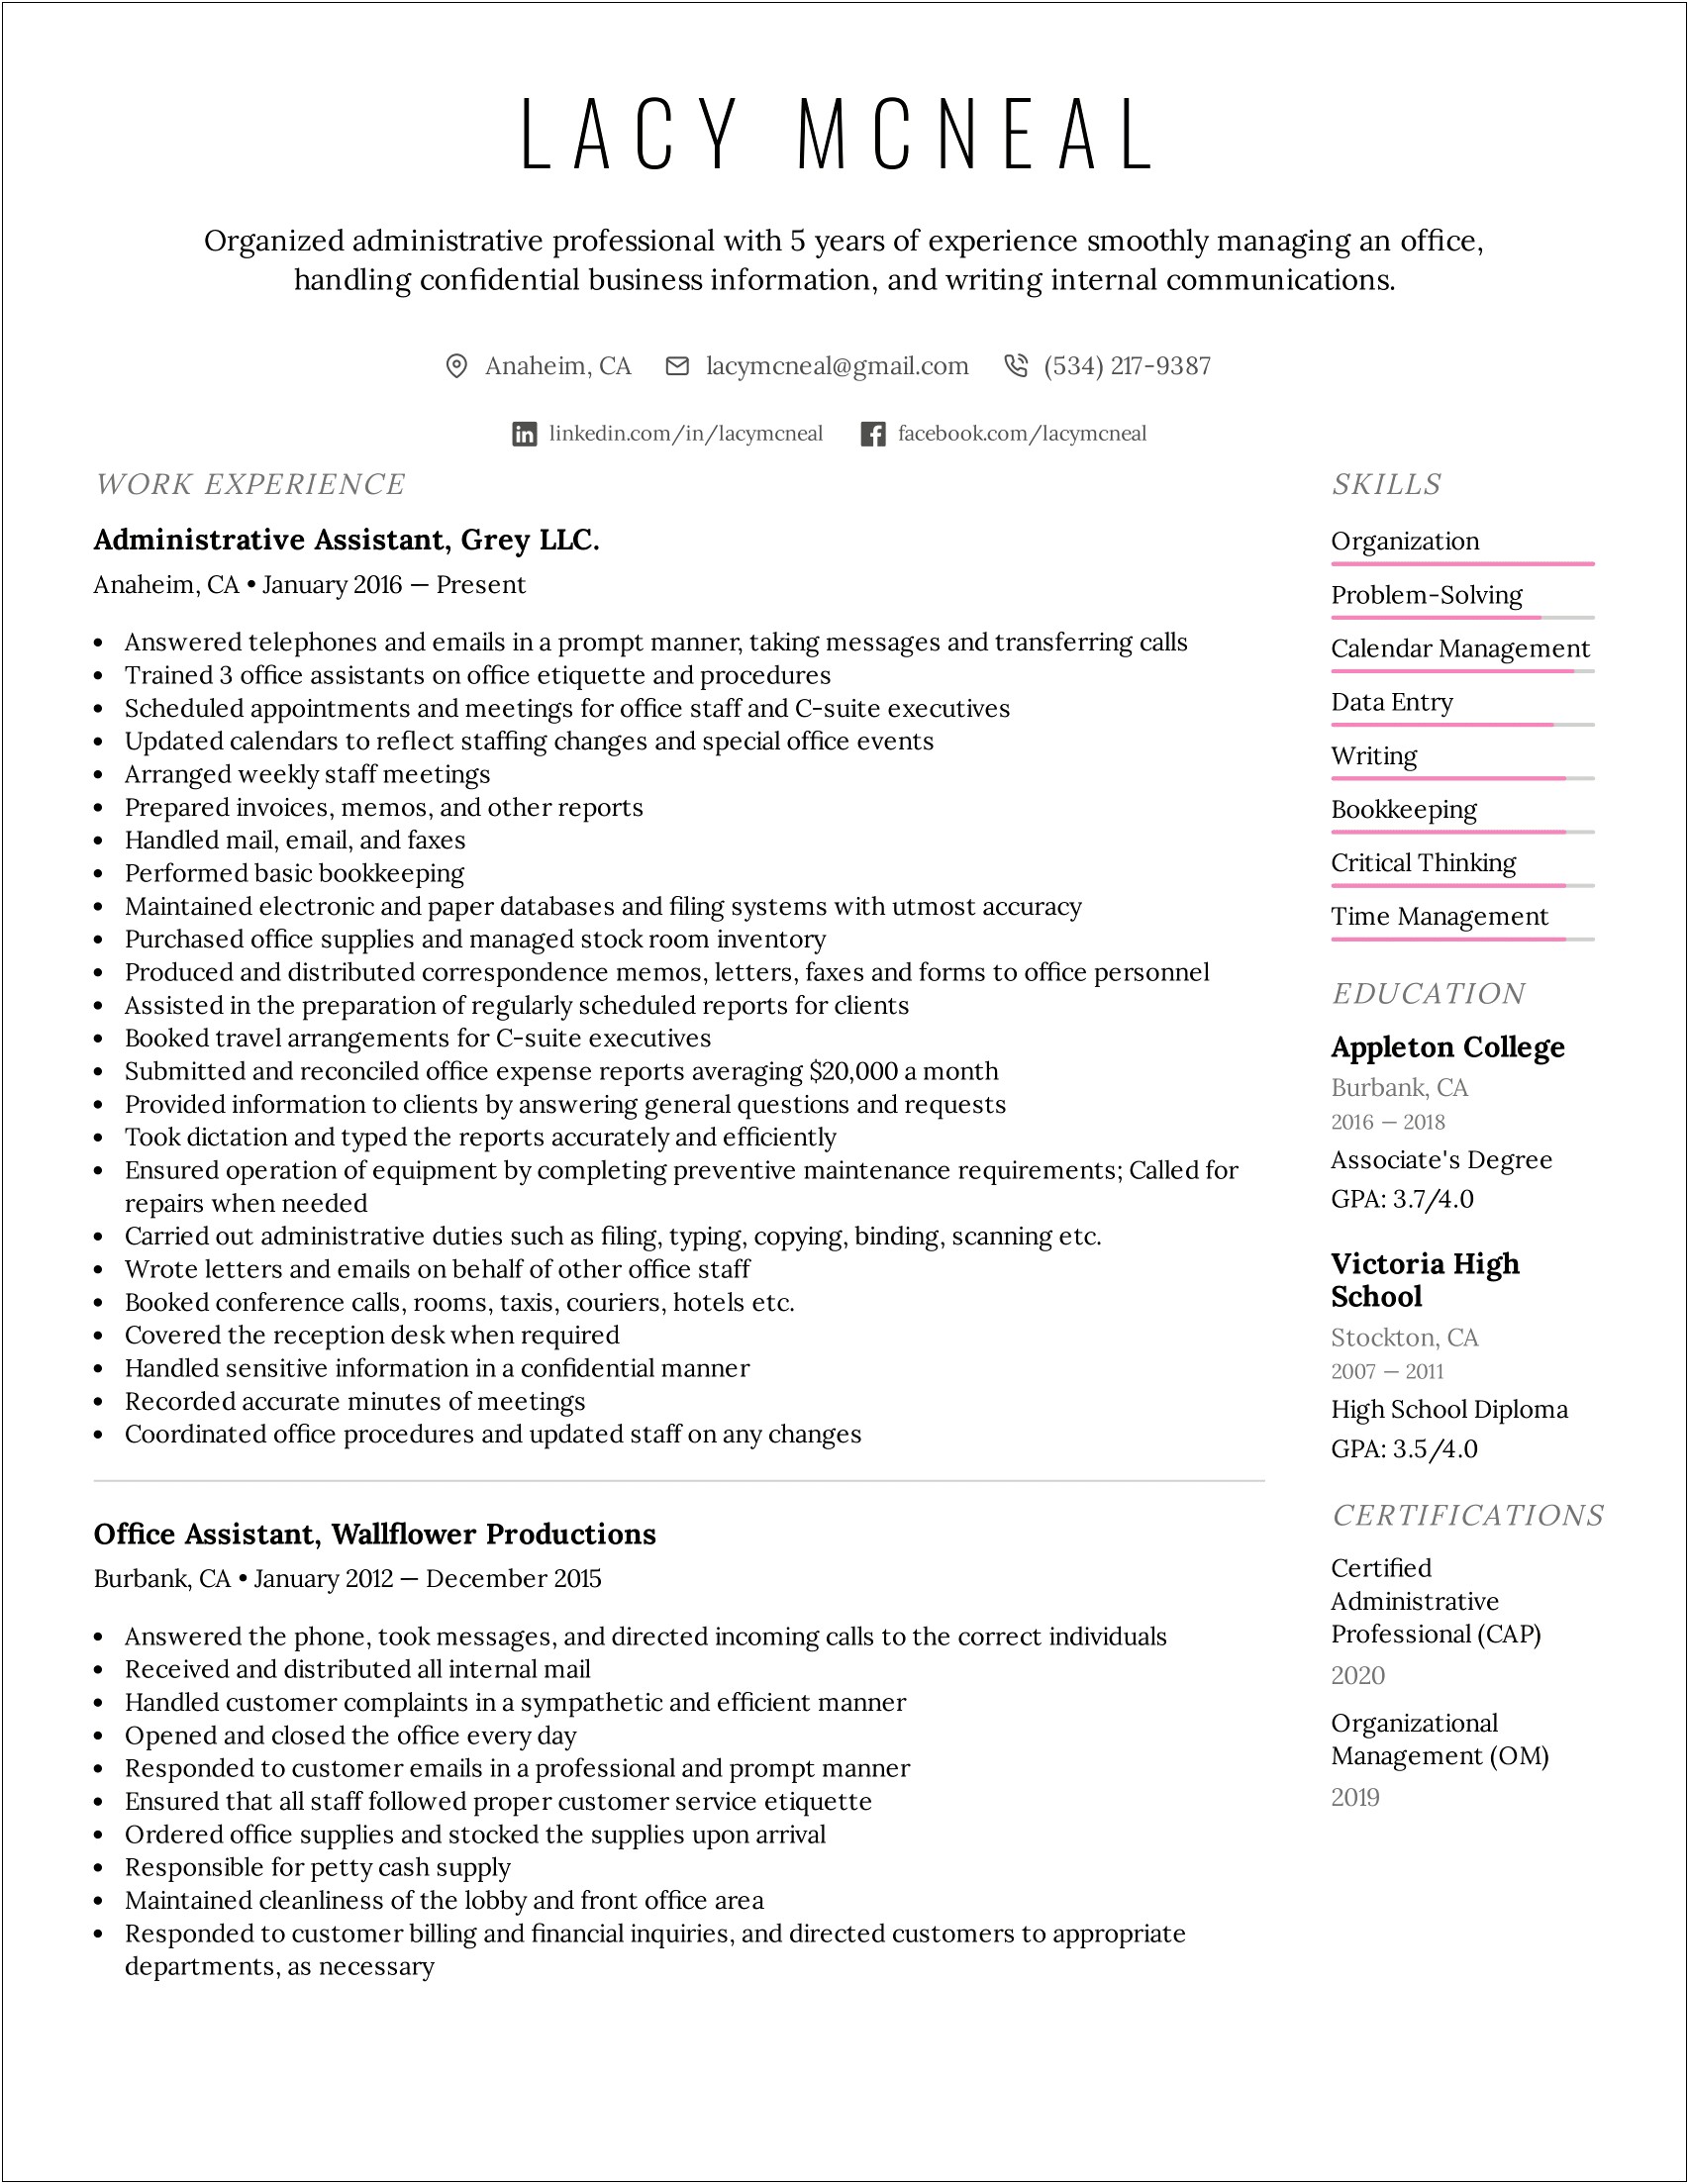 Best Administrative Assistant Resume Key Words